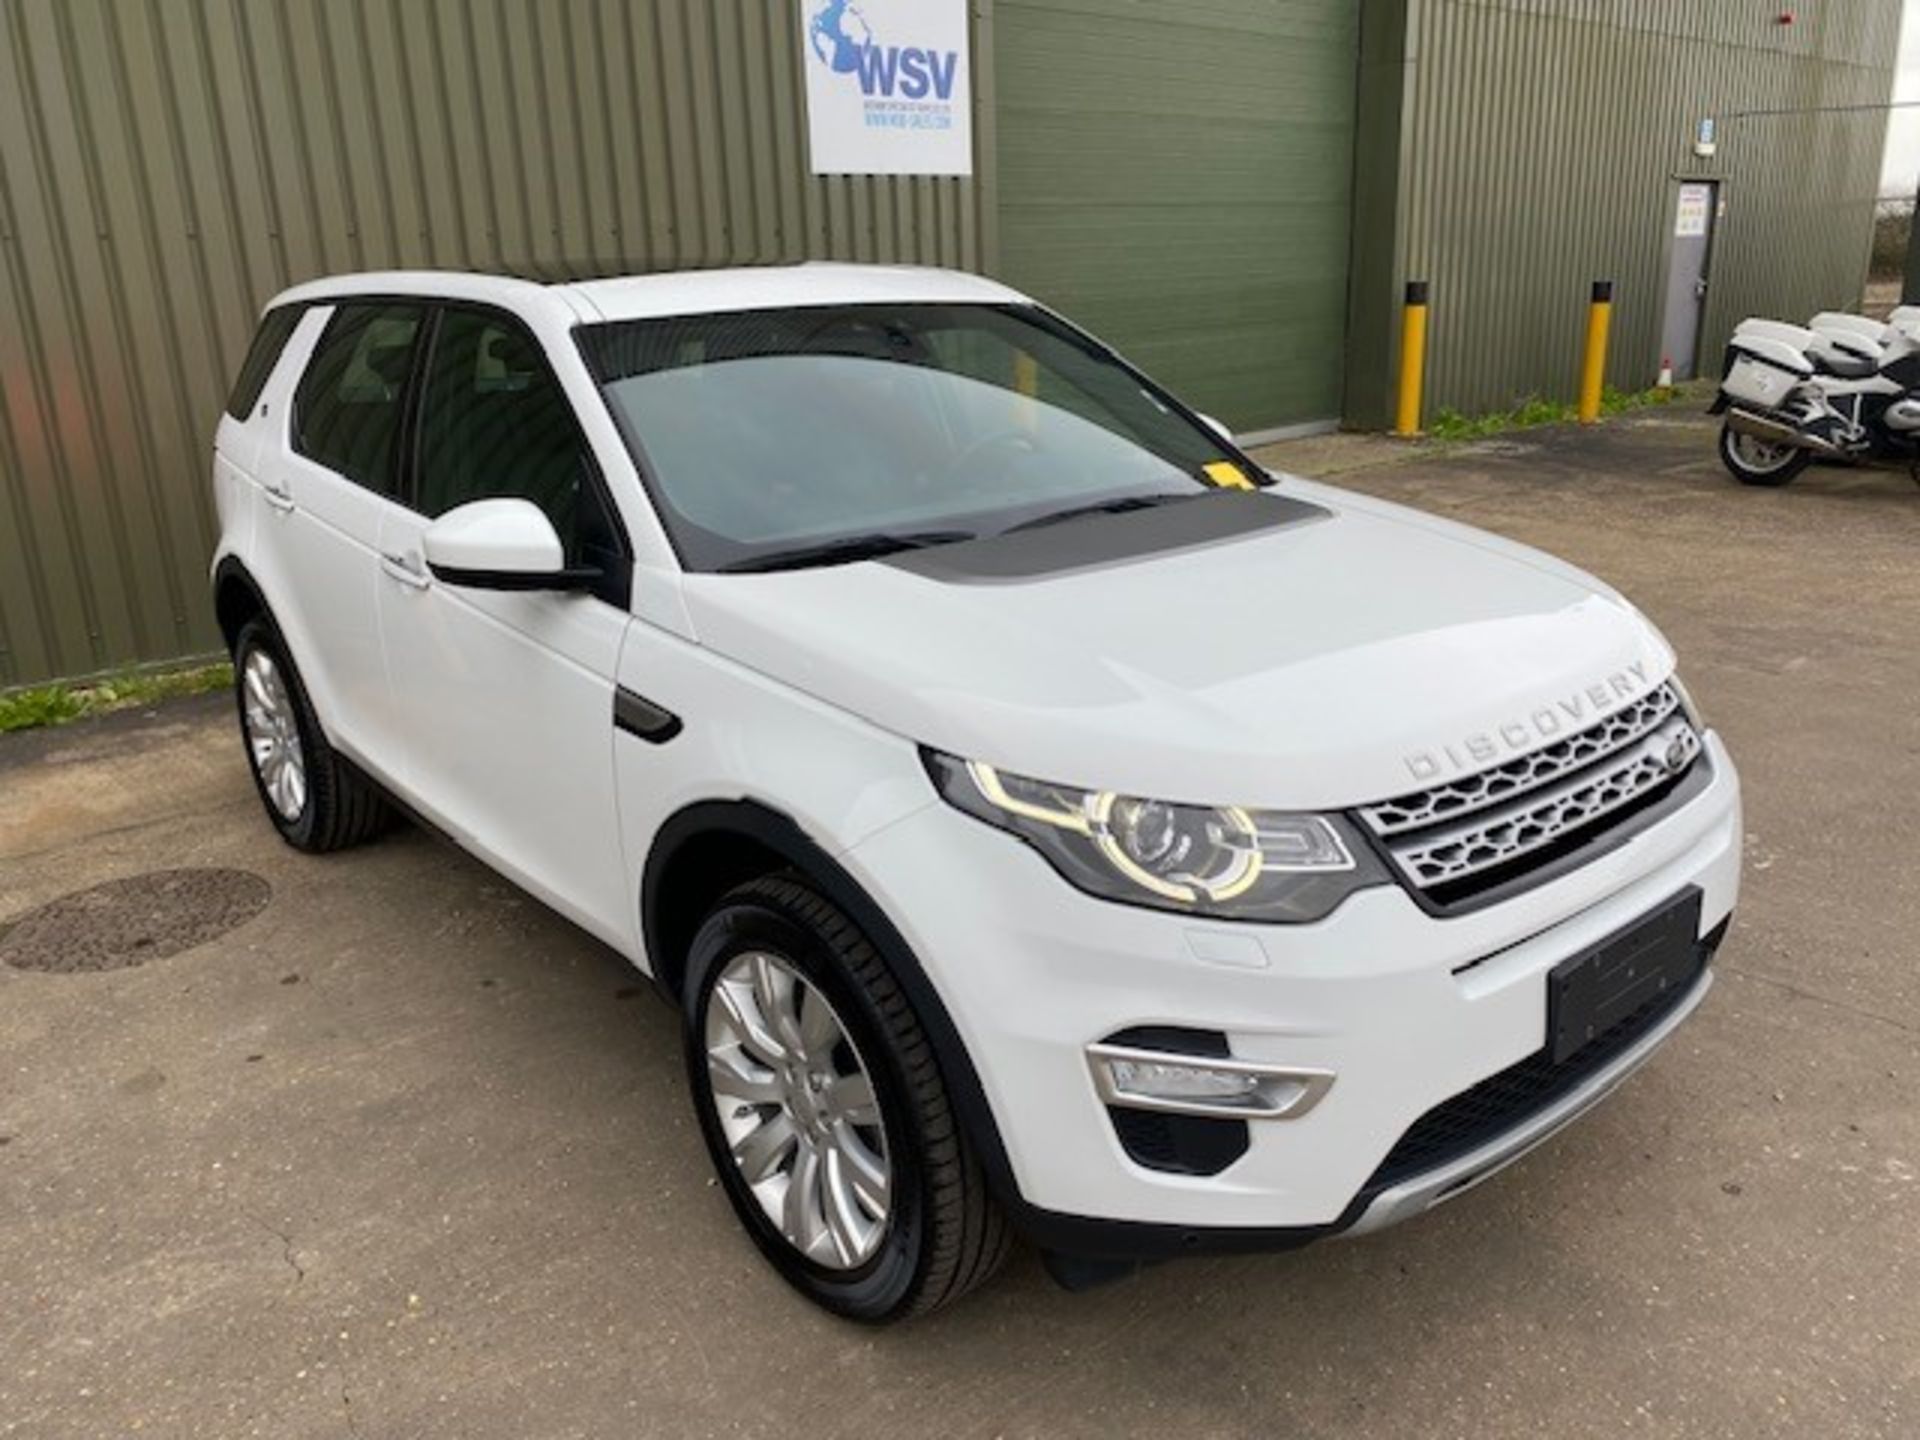 Unused Land Rover Discovery Sport 2.0Si4 HSE Luxury, LHD, year 2015, delivery mileage - 30KMs only! - Image 10 of 48